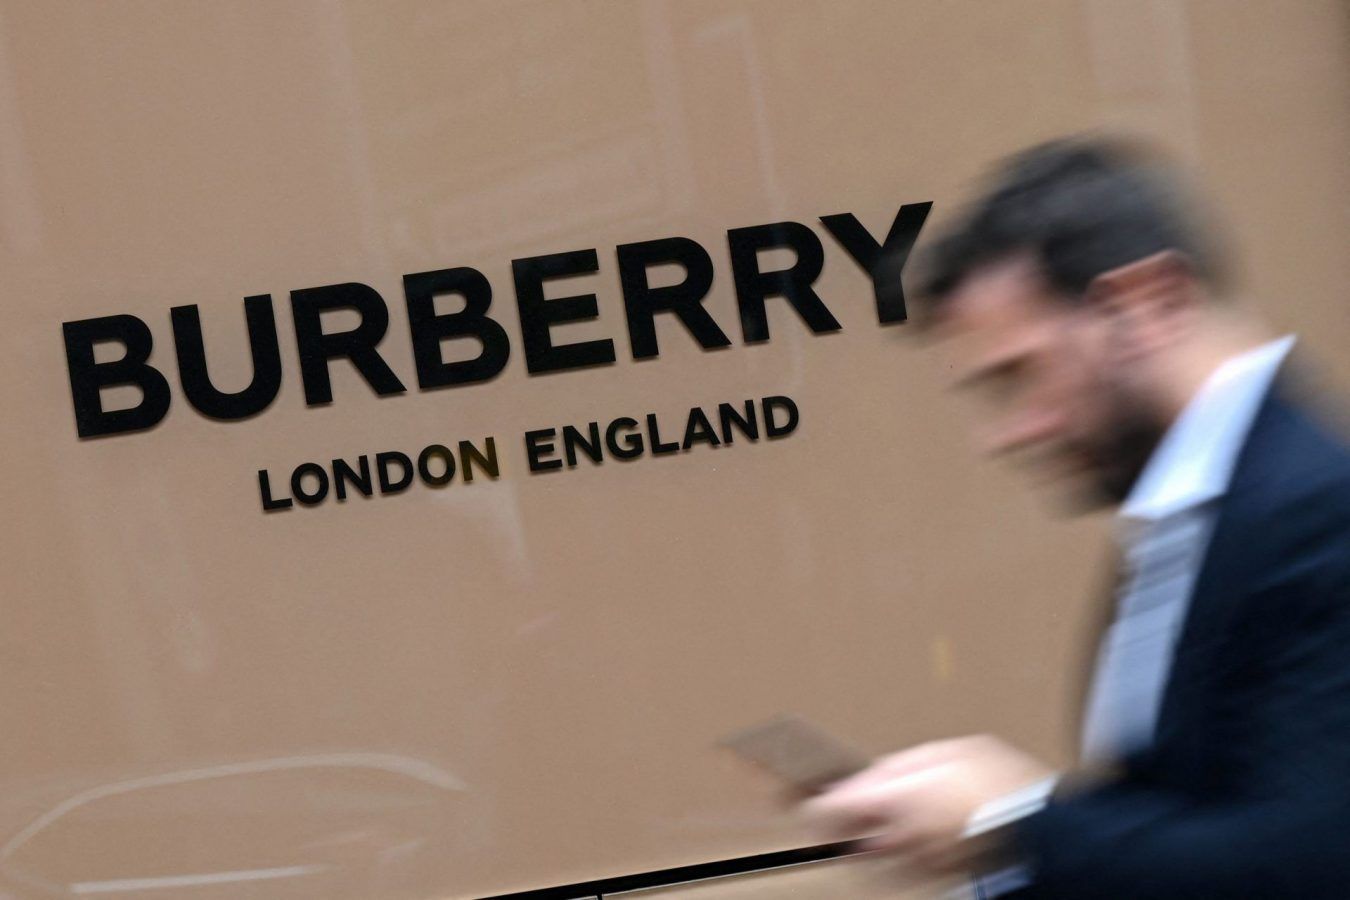 Burberry replaces creative chief Riccardo Tisci with Daniel Lee